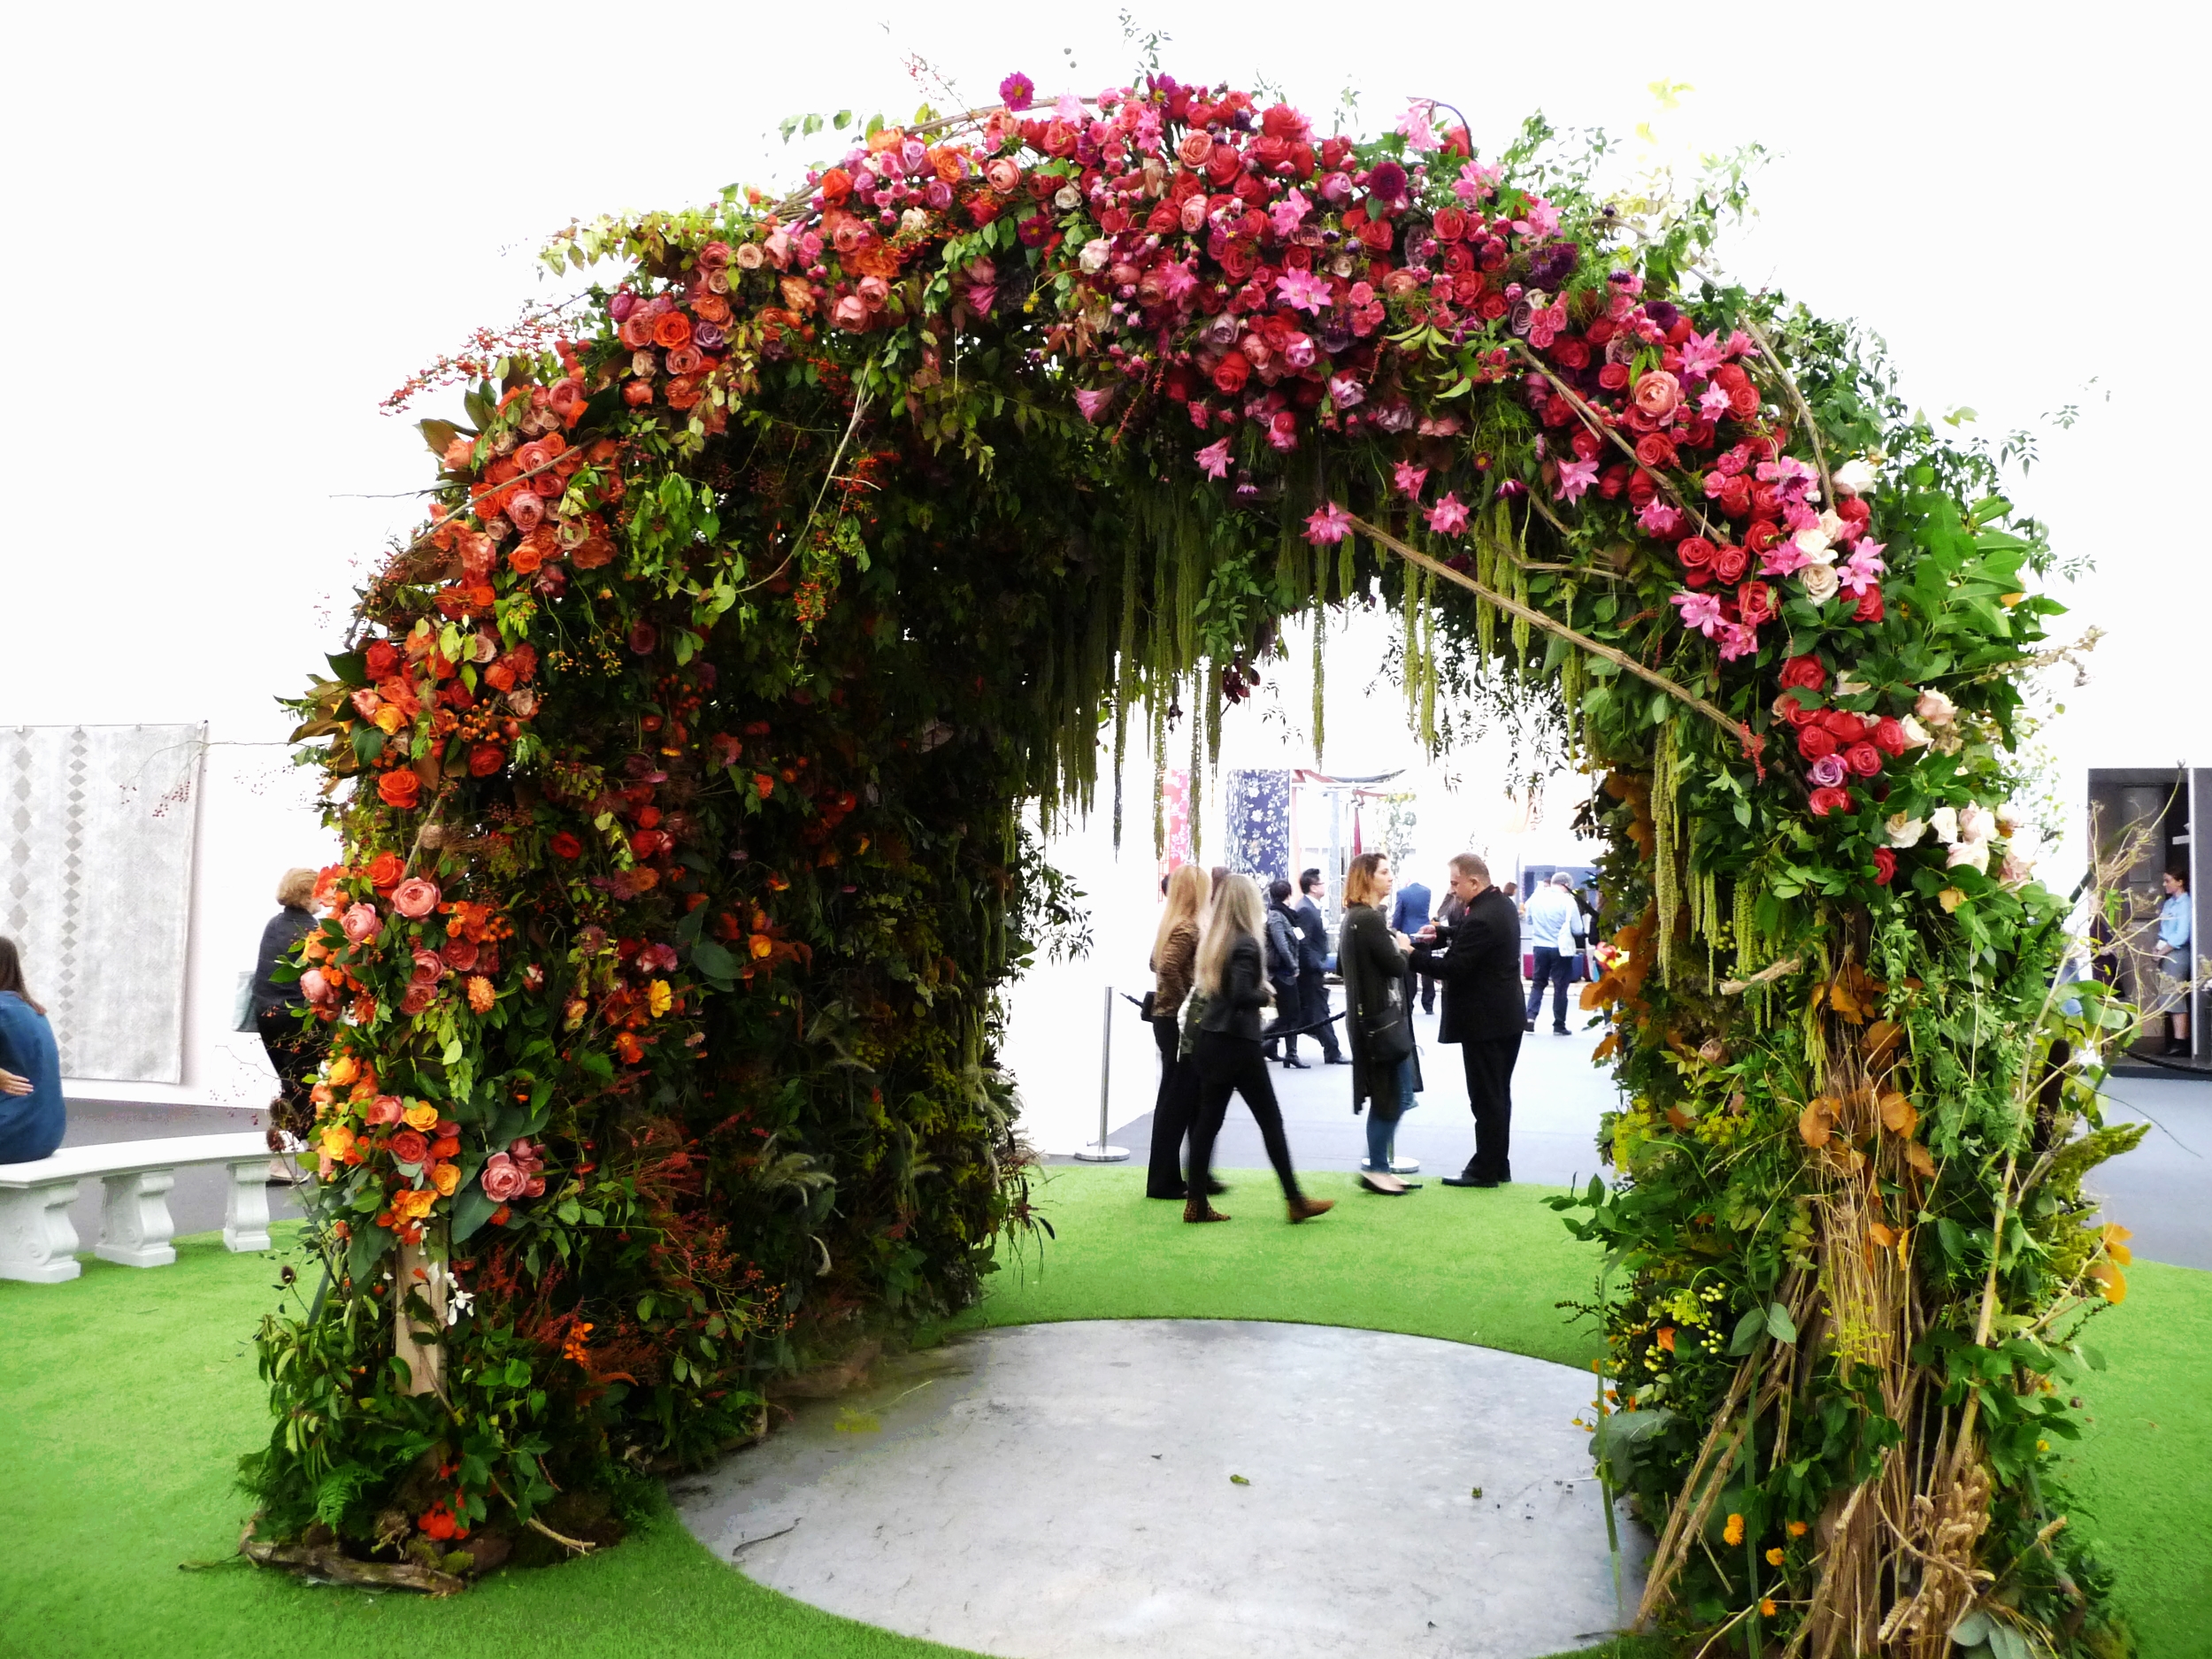  Beautiful archway of flowers in the foyer at Decorex 